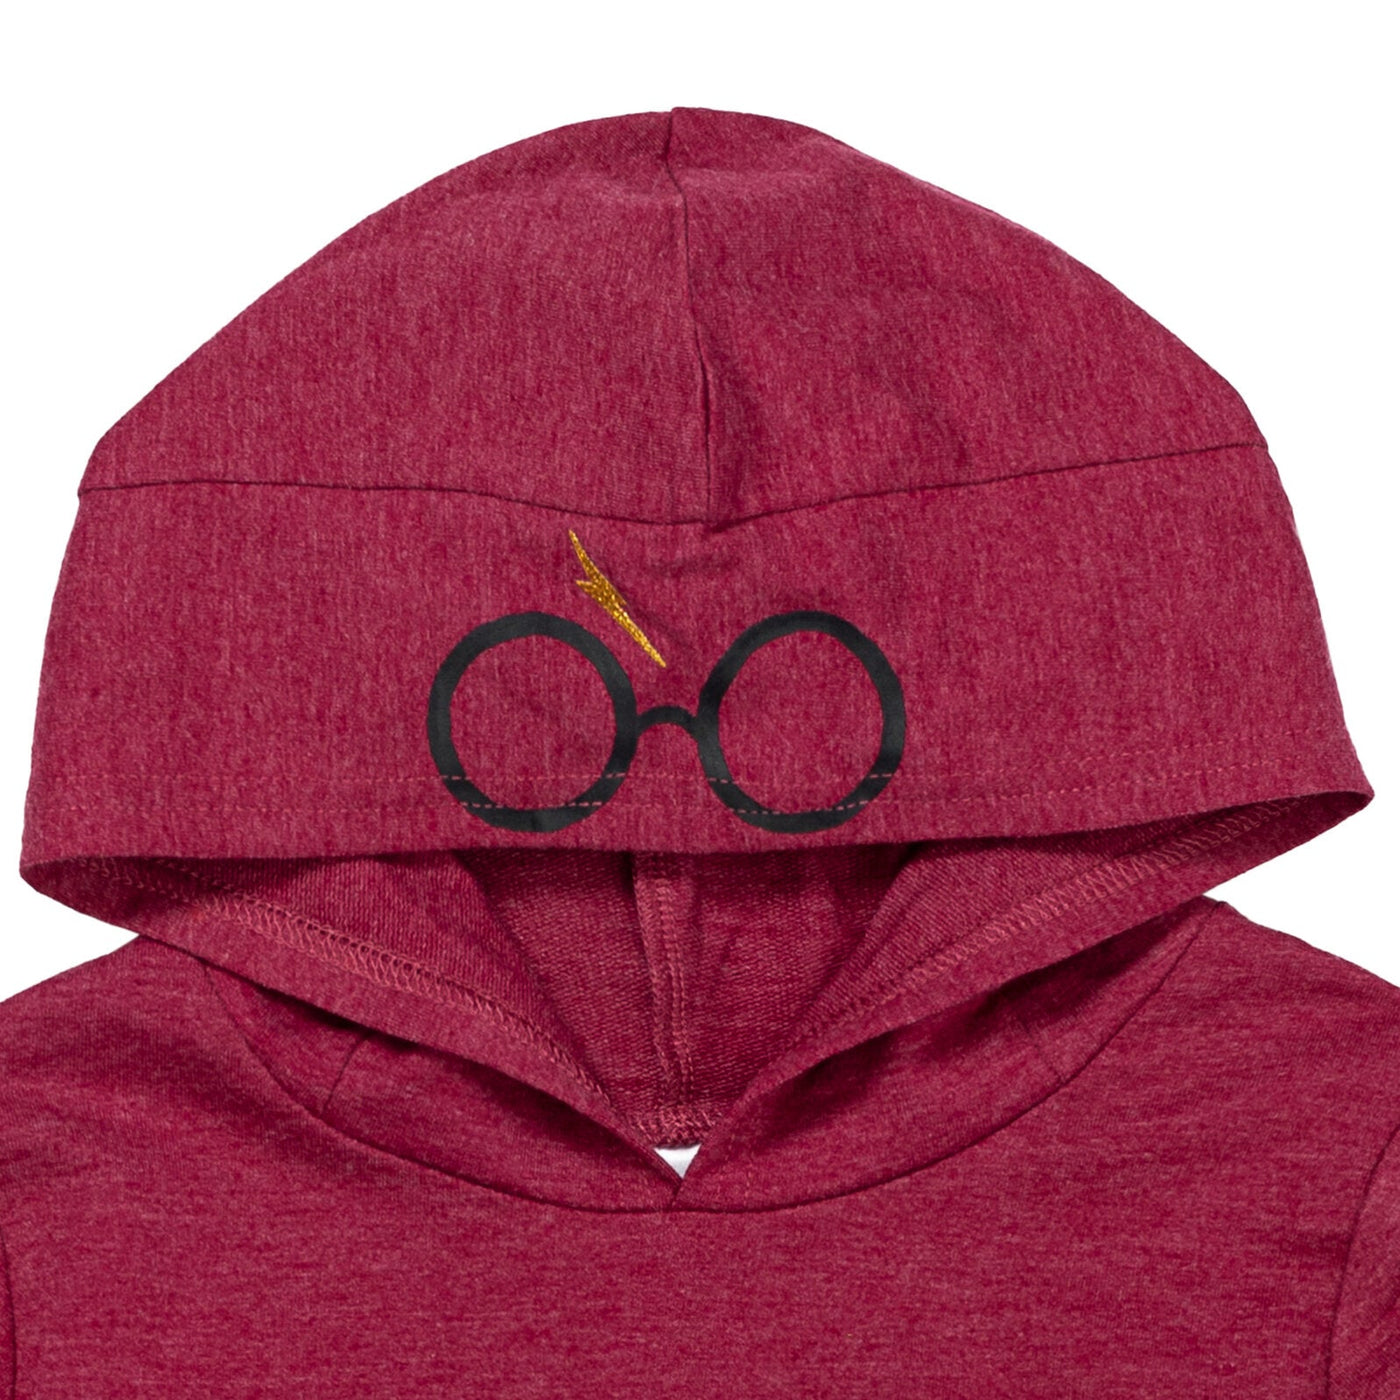 Harry Potter French Terry Pullover Hoodie - imagikids